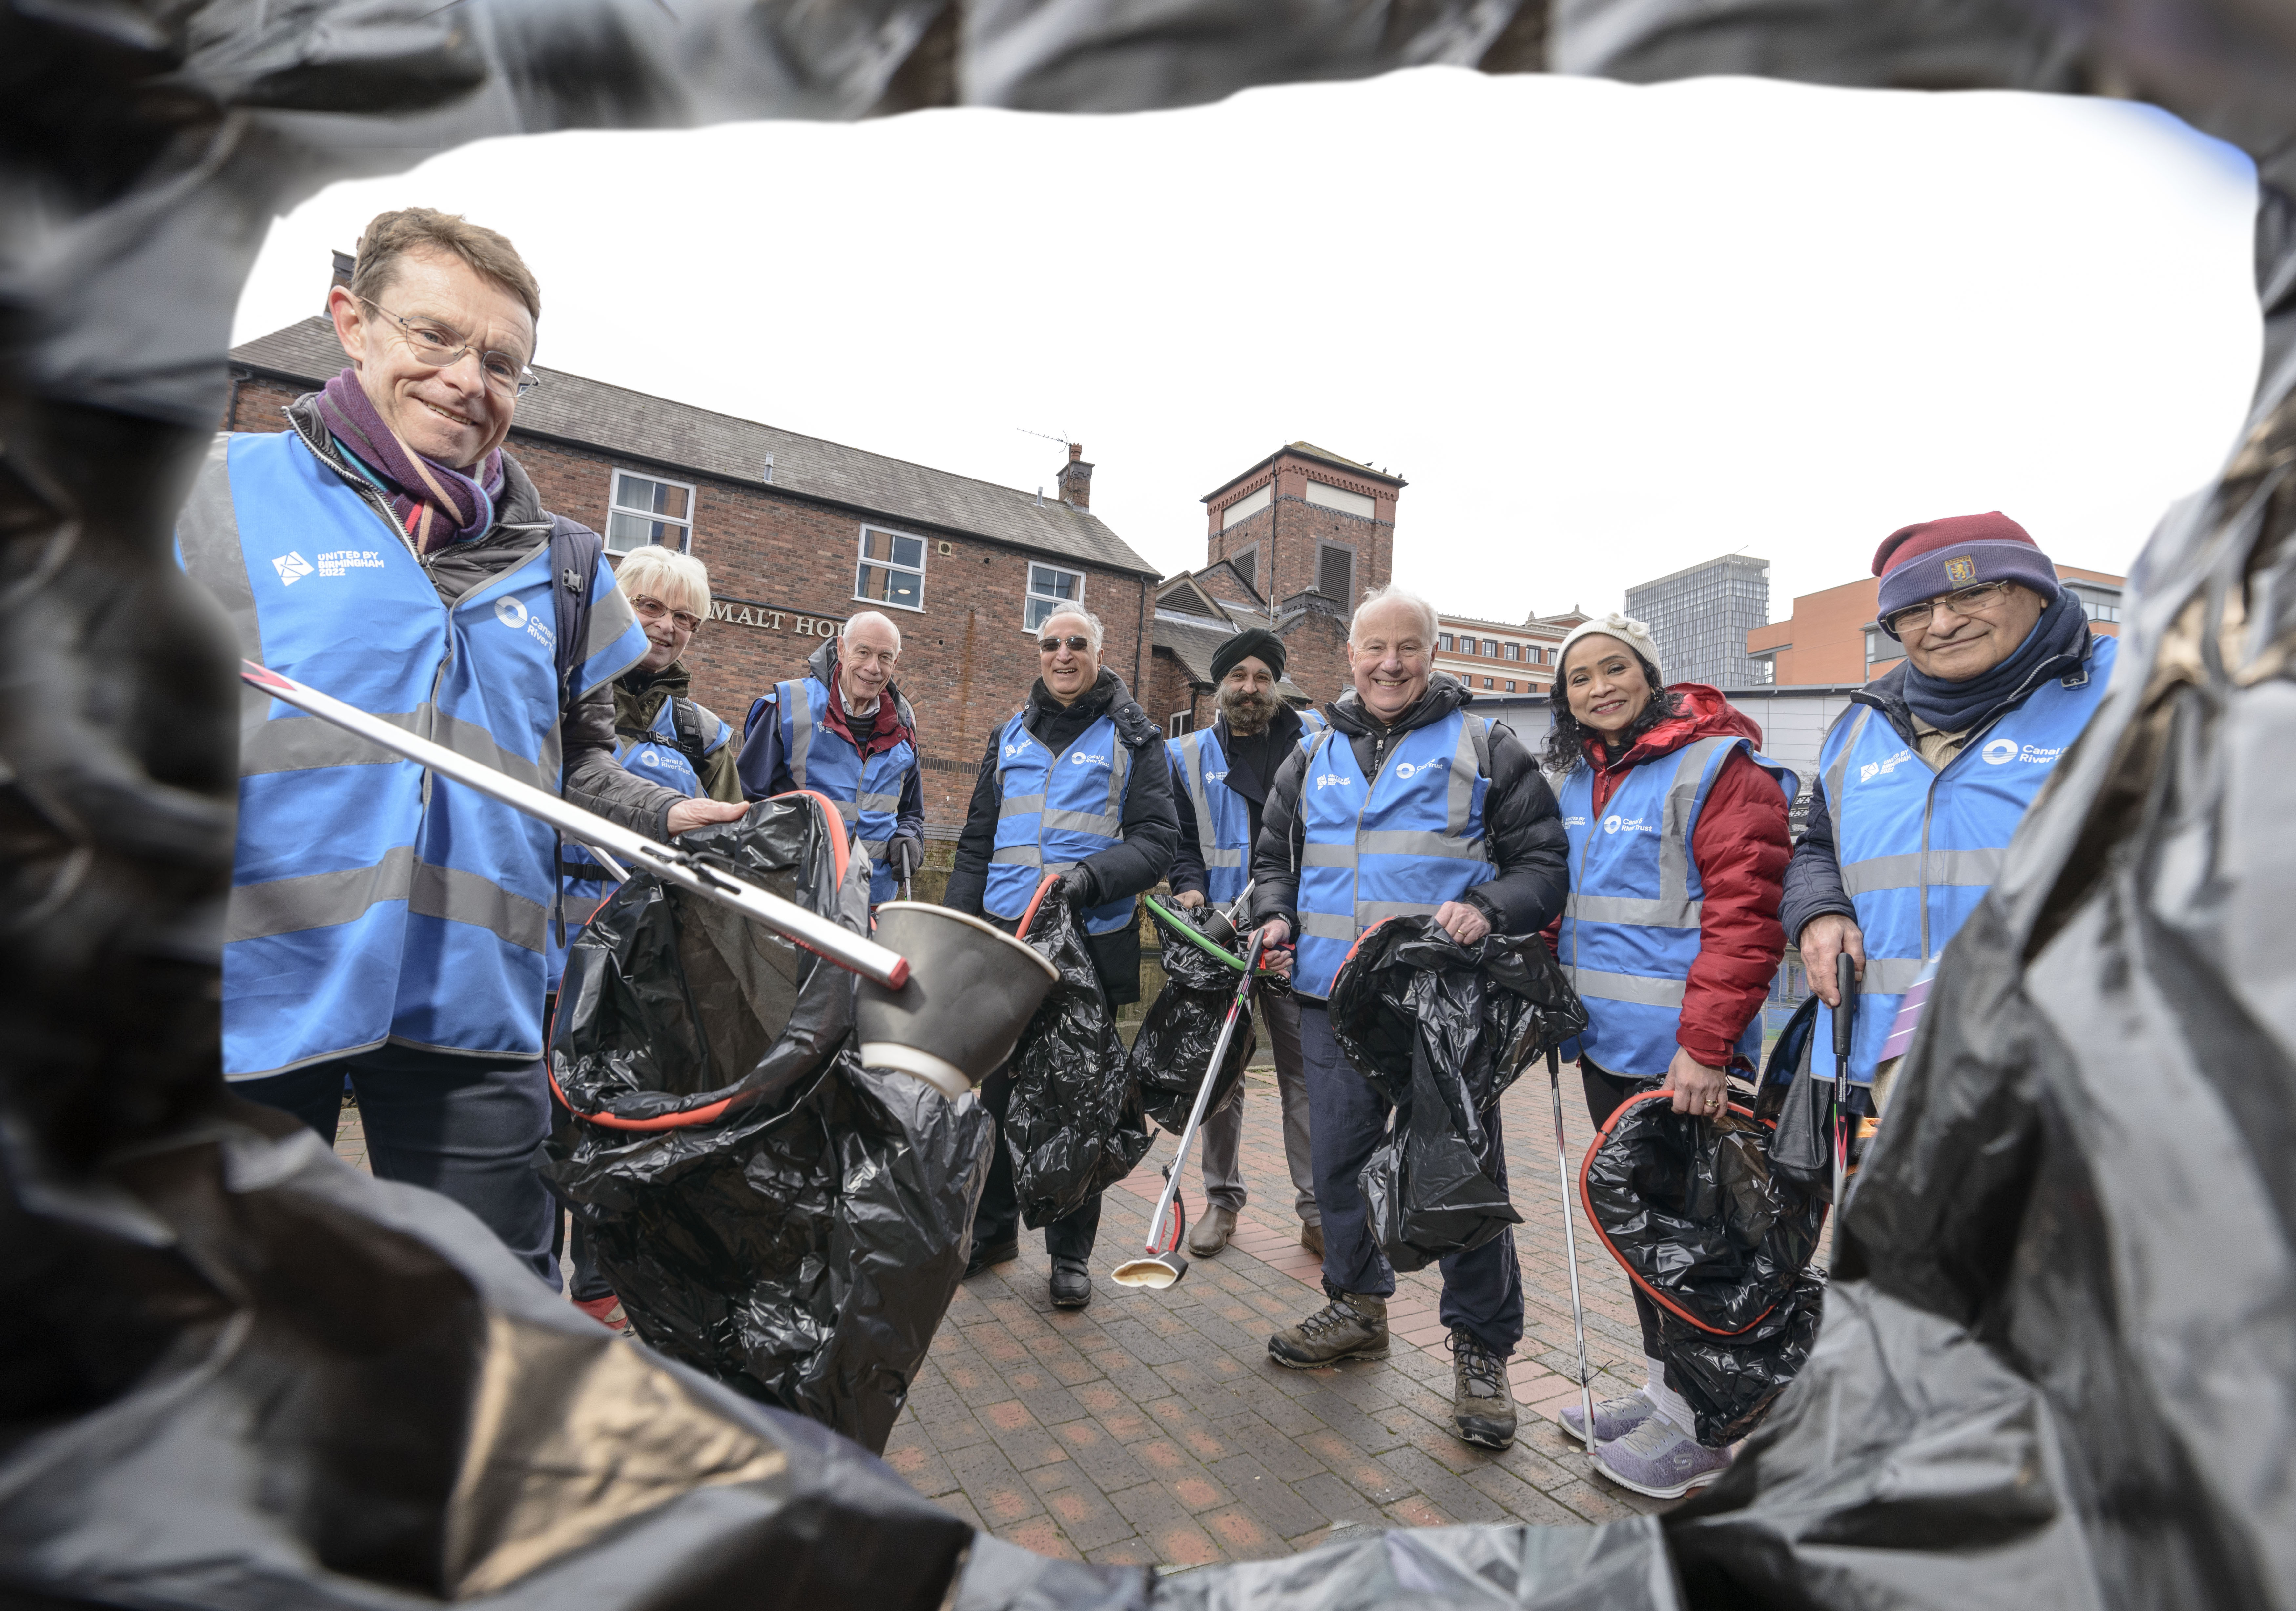 Andy Street, West Midlands Mayor, (far left) was joined by John Crabtree, the Lord Lieutenant of the West Midlands (third from right) for the litter pick.